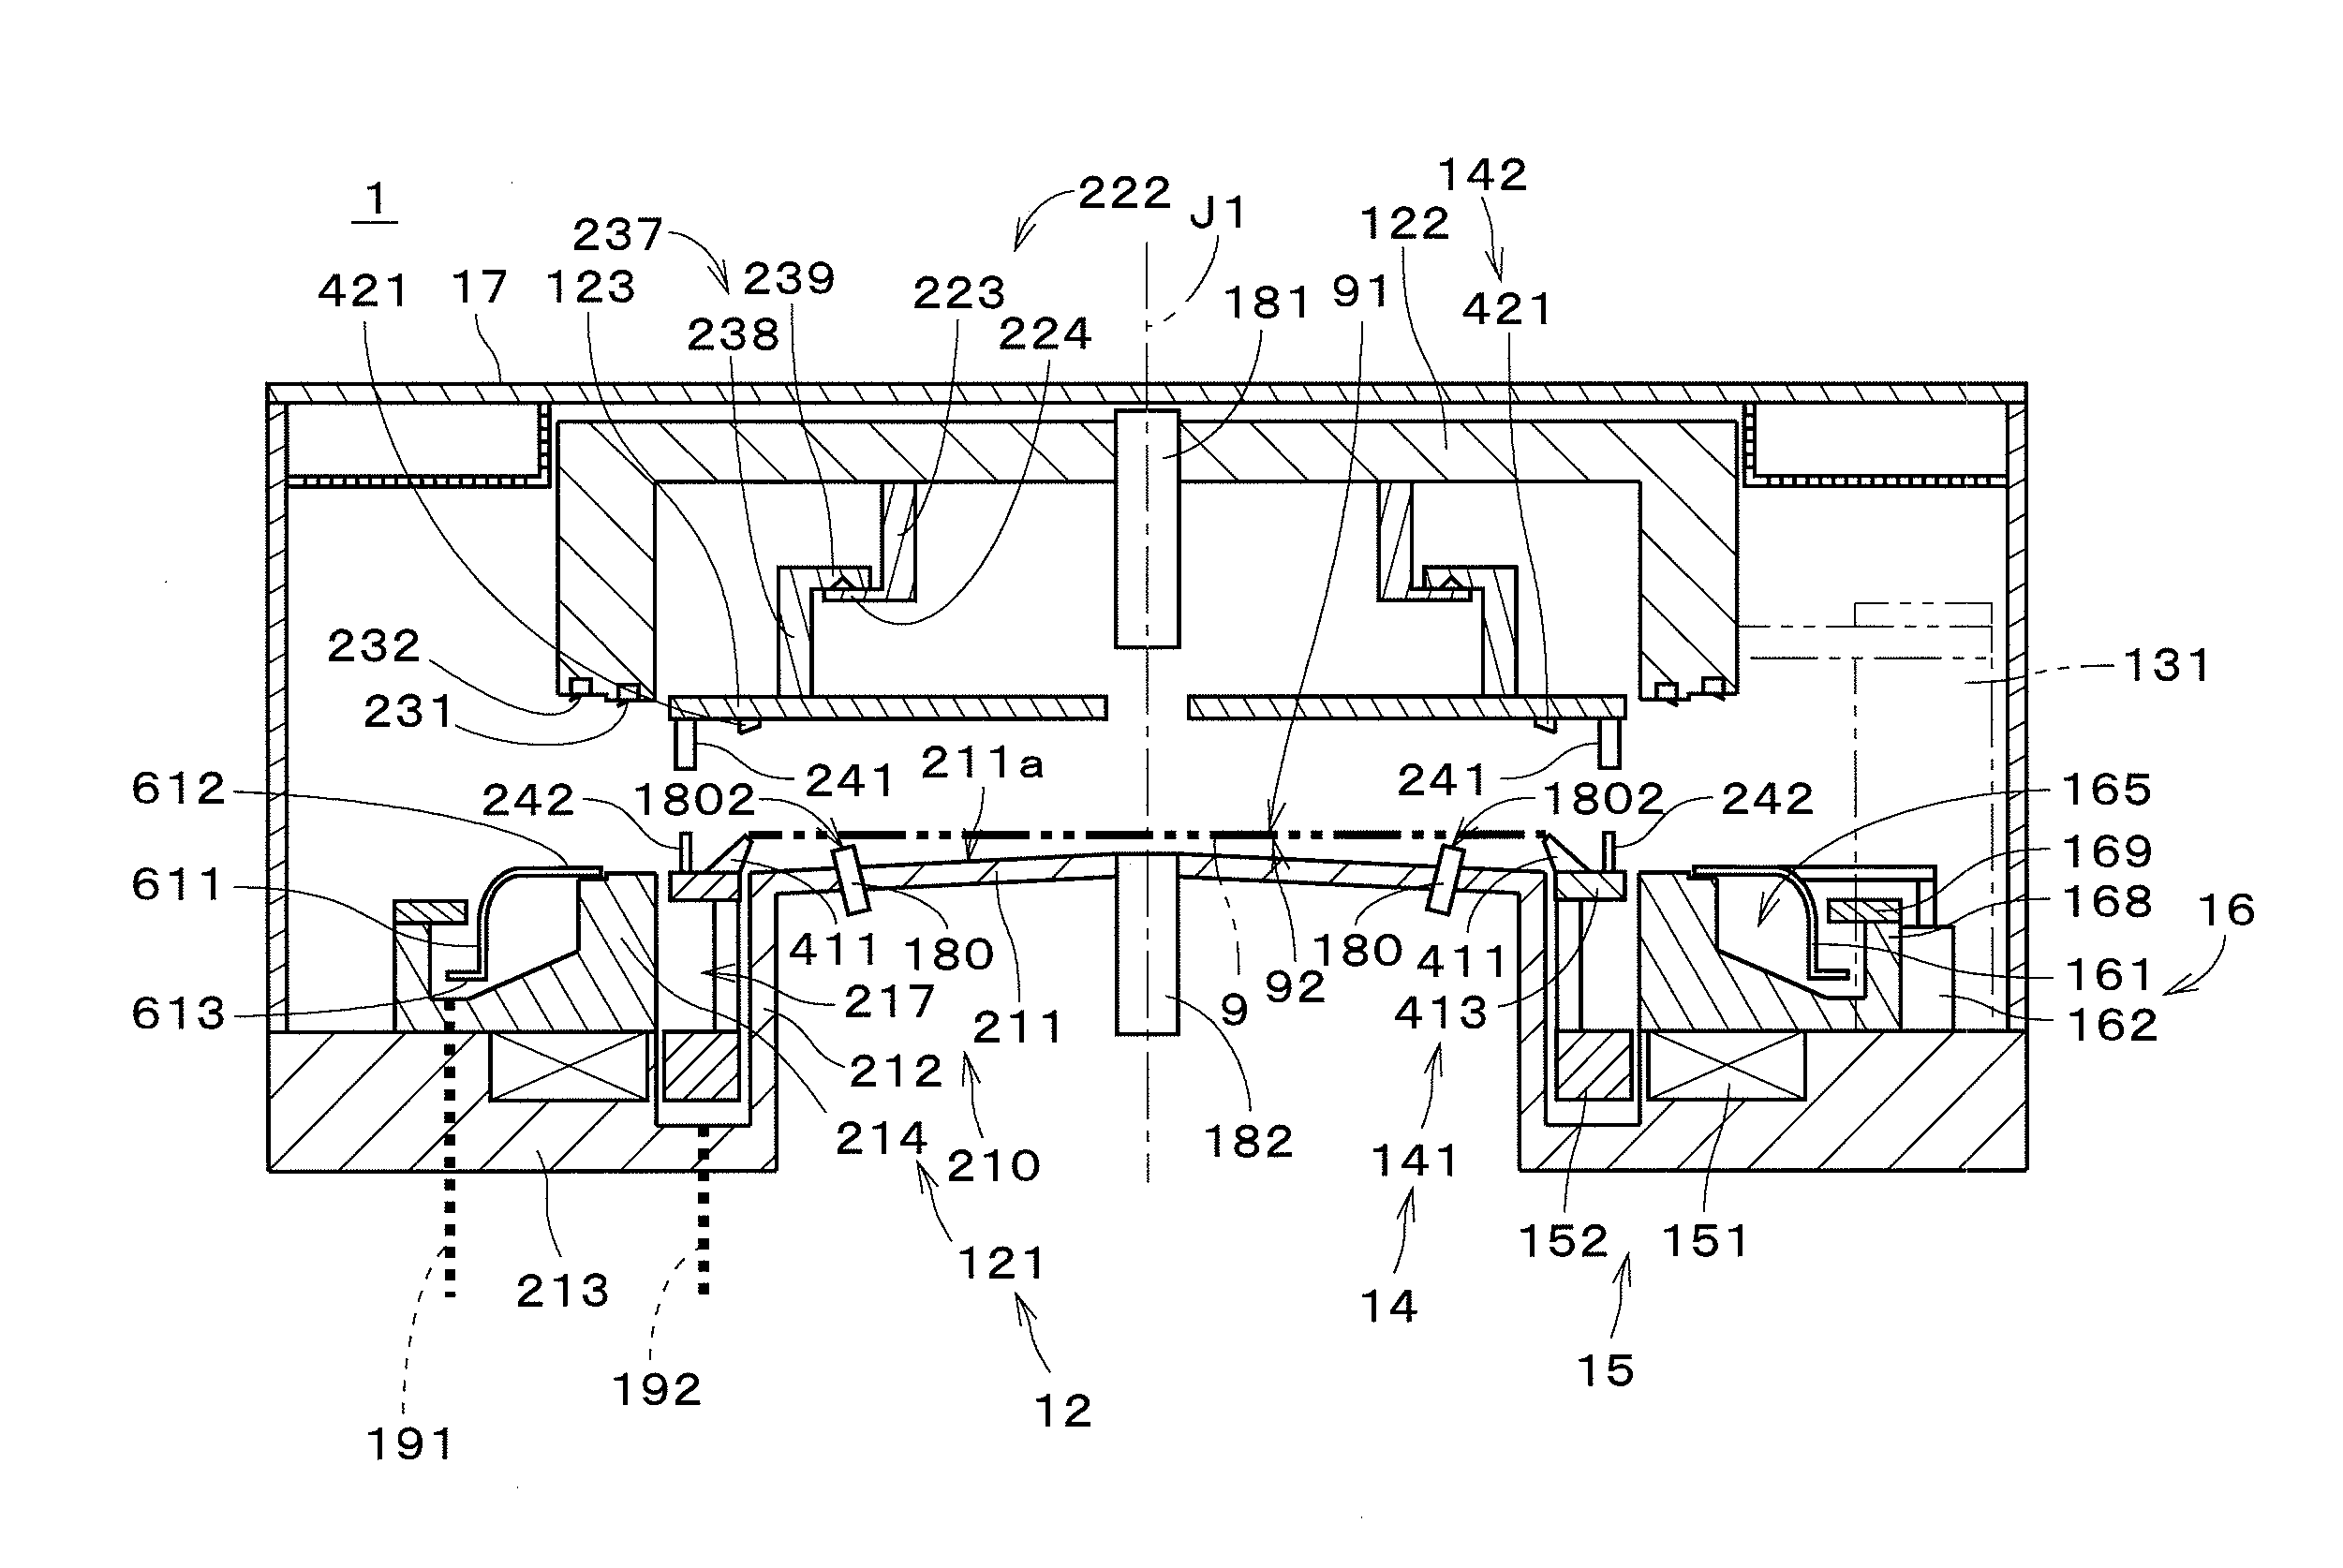 Substrate processing apparatus and substrate processing method